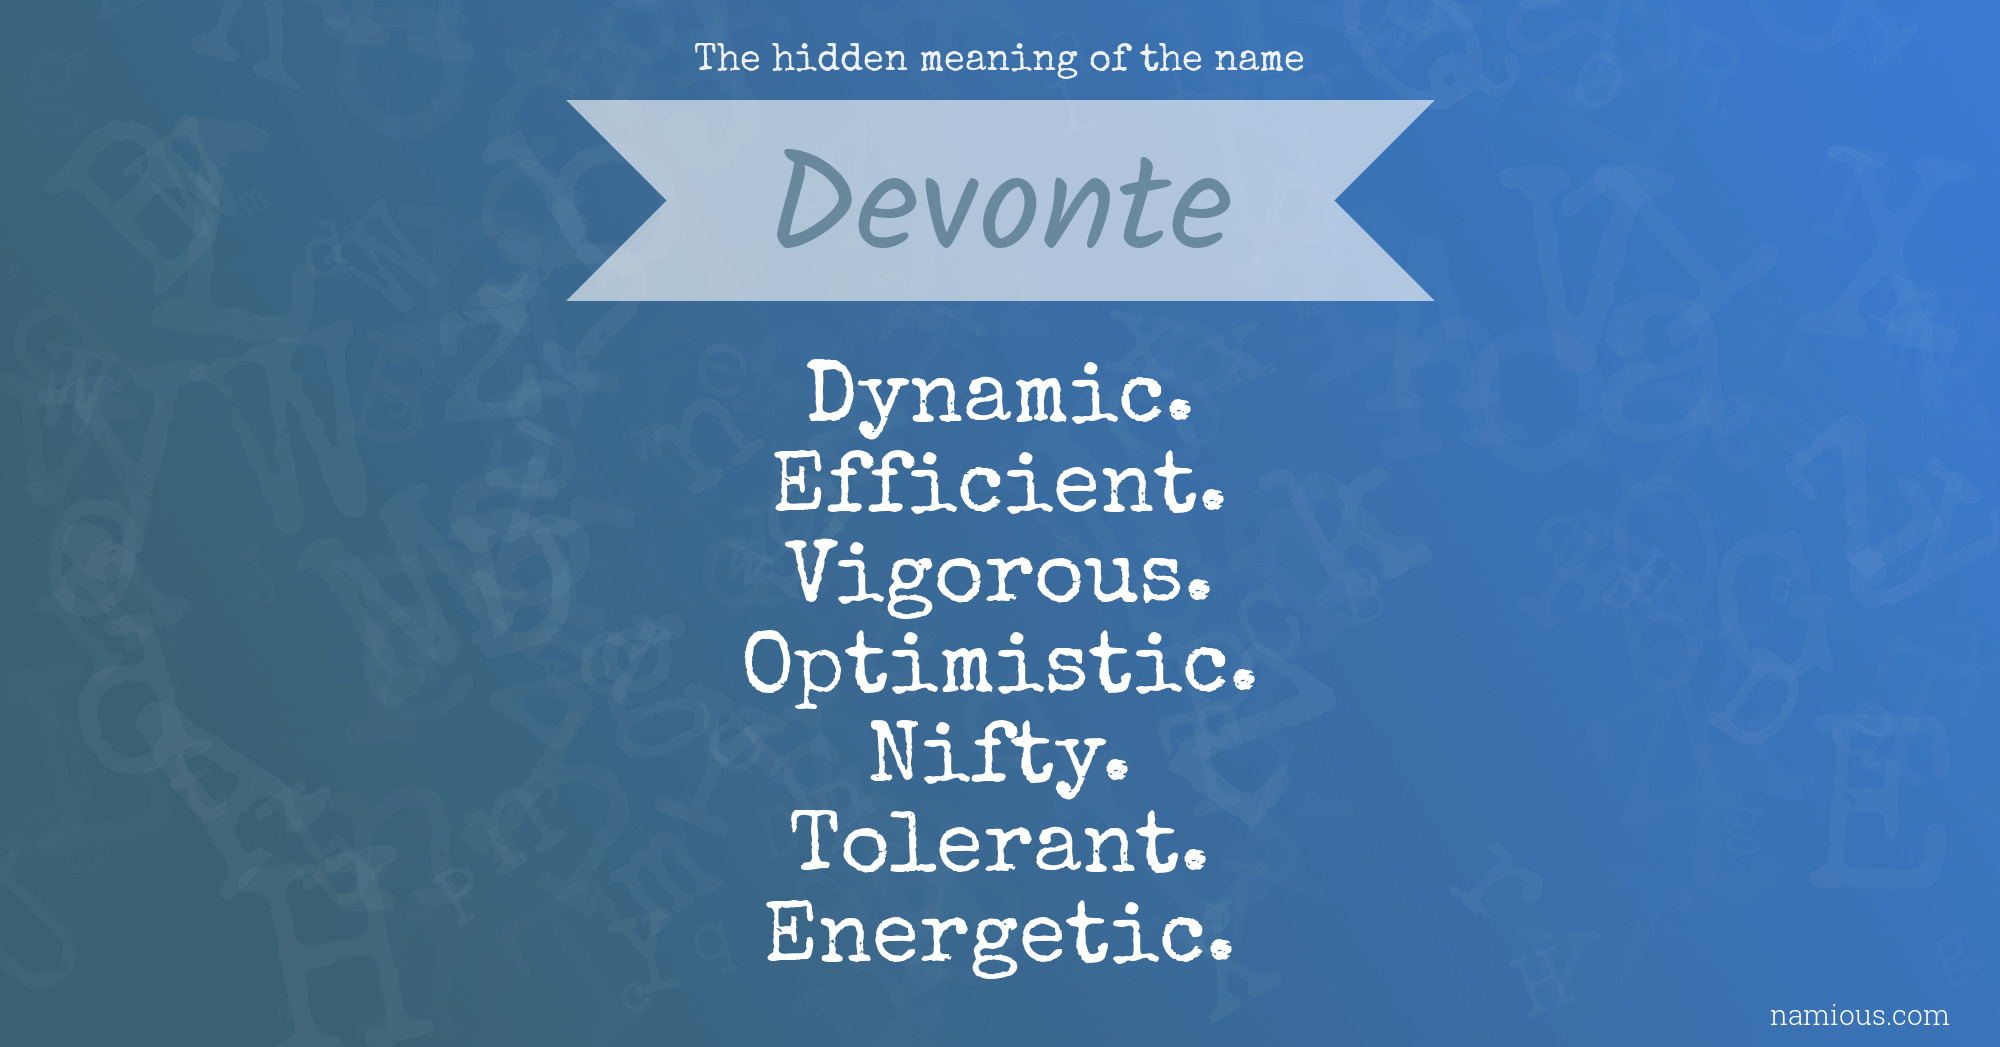 The hidden meaning of the name Devonte